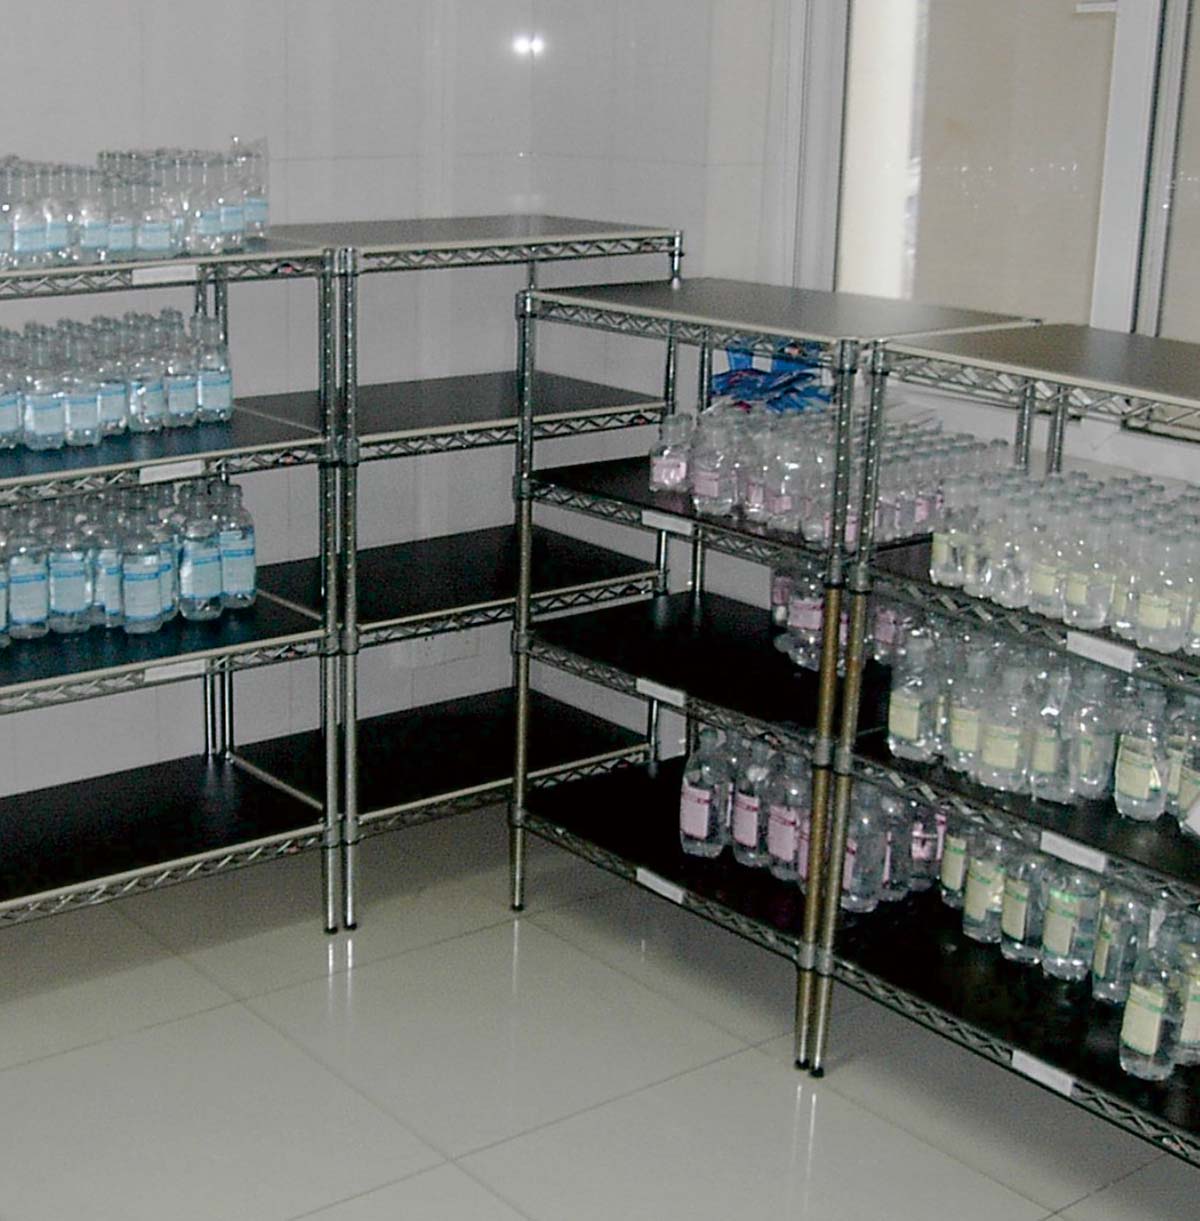 Chrome Wire Shelving Unit / Storage Racks for Medical Industry / Rolling Trolley Cart / 18 x 48 NSF Chrome Wire Shelf